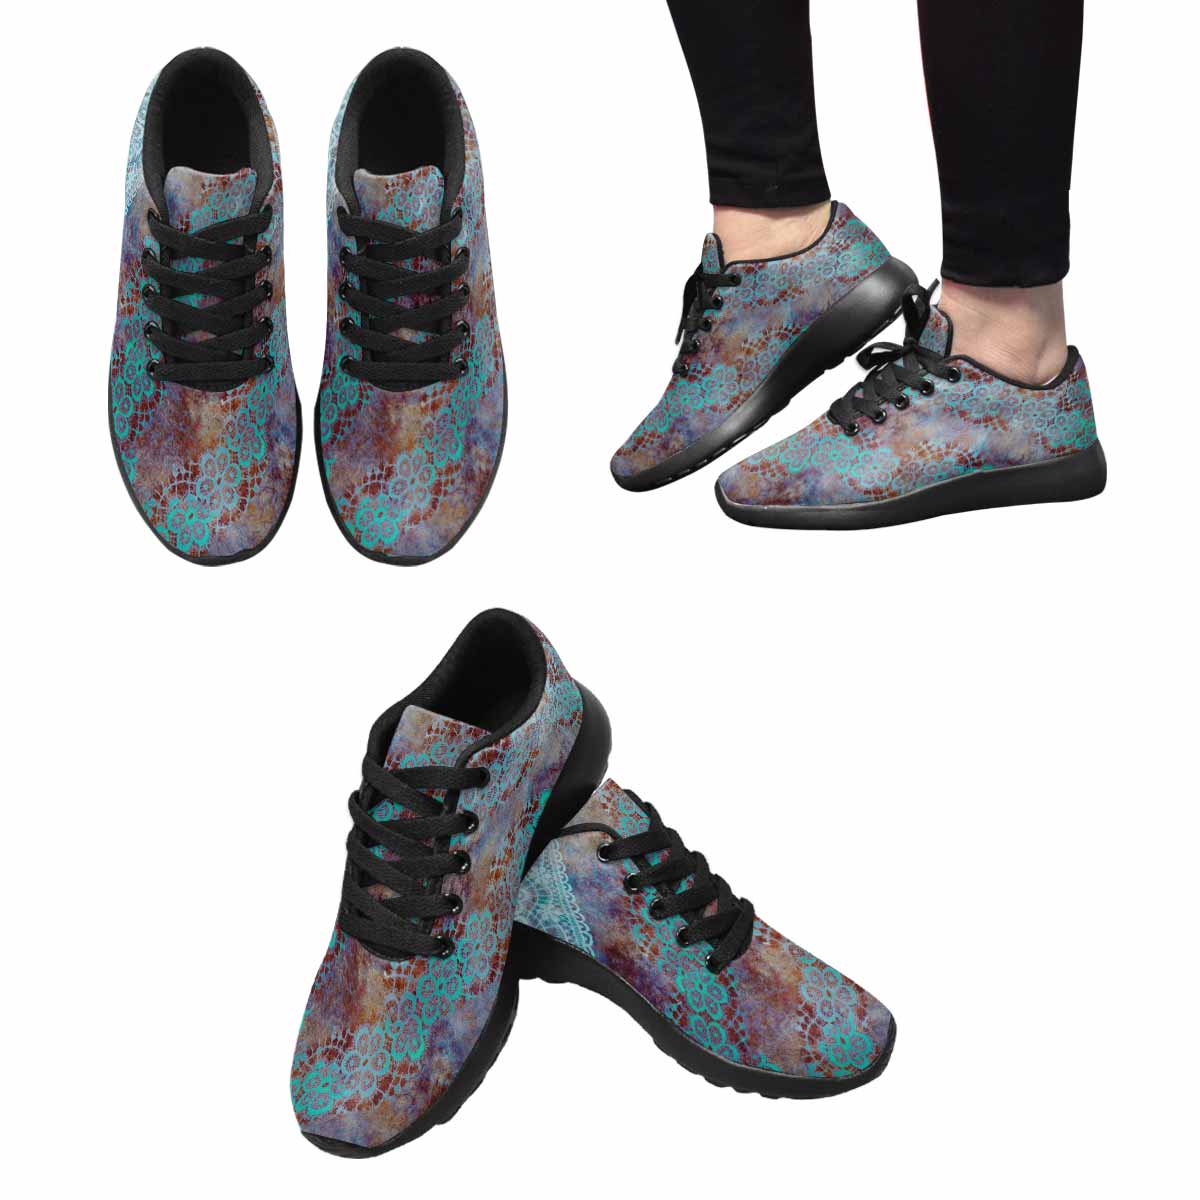 Victorian lace print, womens cute casual or running sneakers, design 37